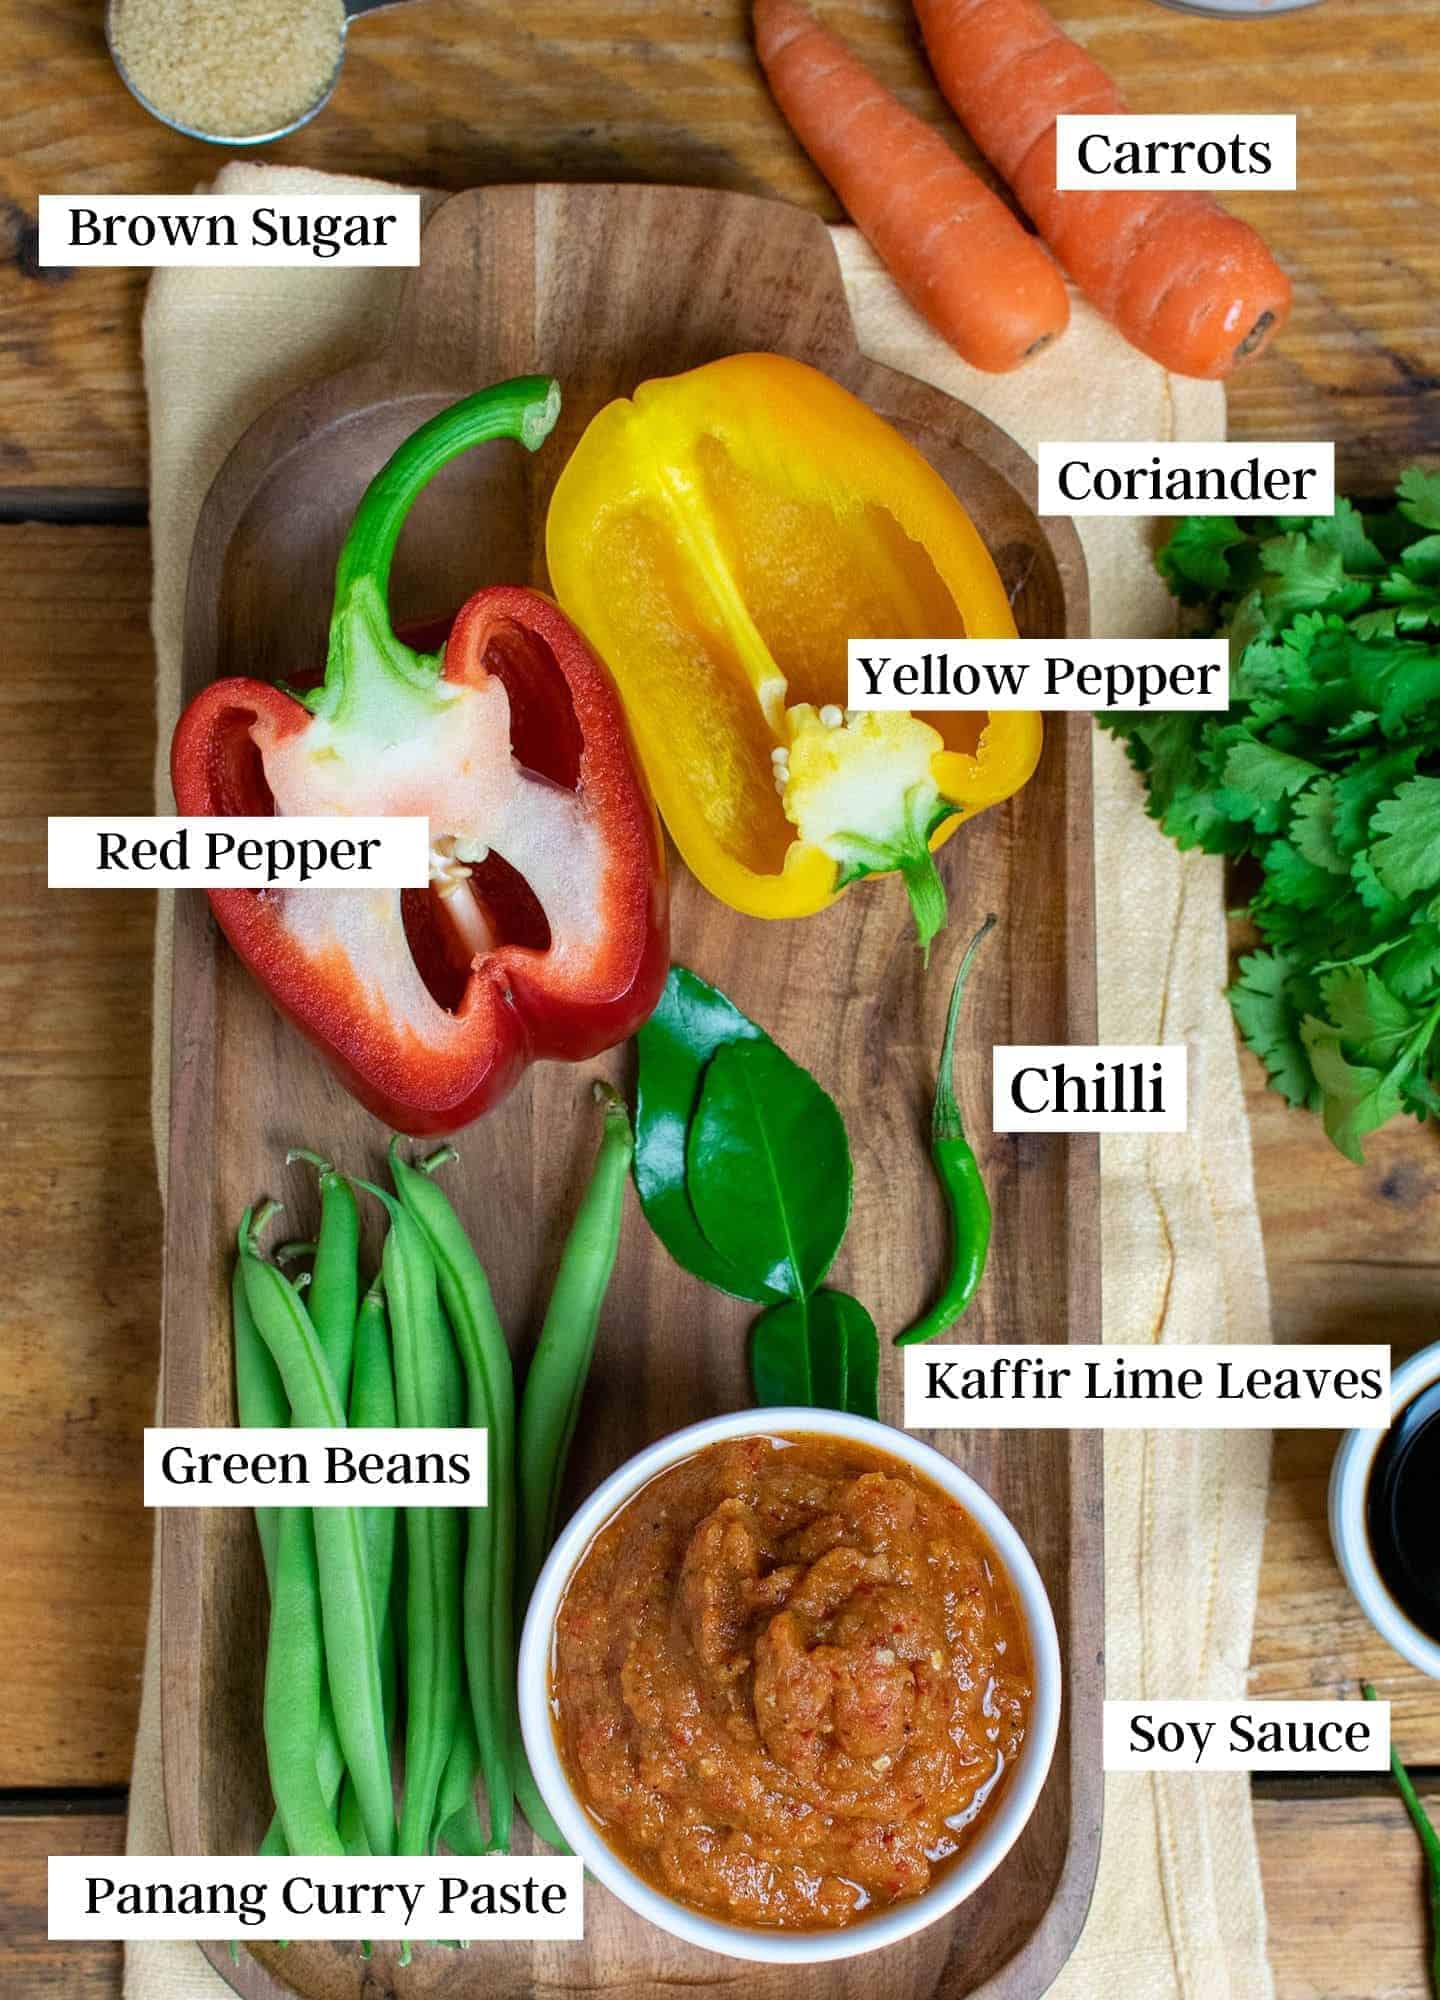 Ingredients laid out on a wooden board showing carrots, peppers, green beans and curry paste